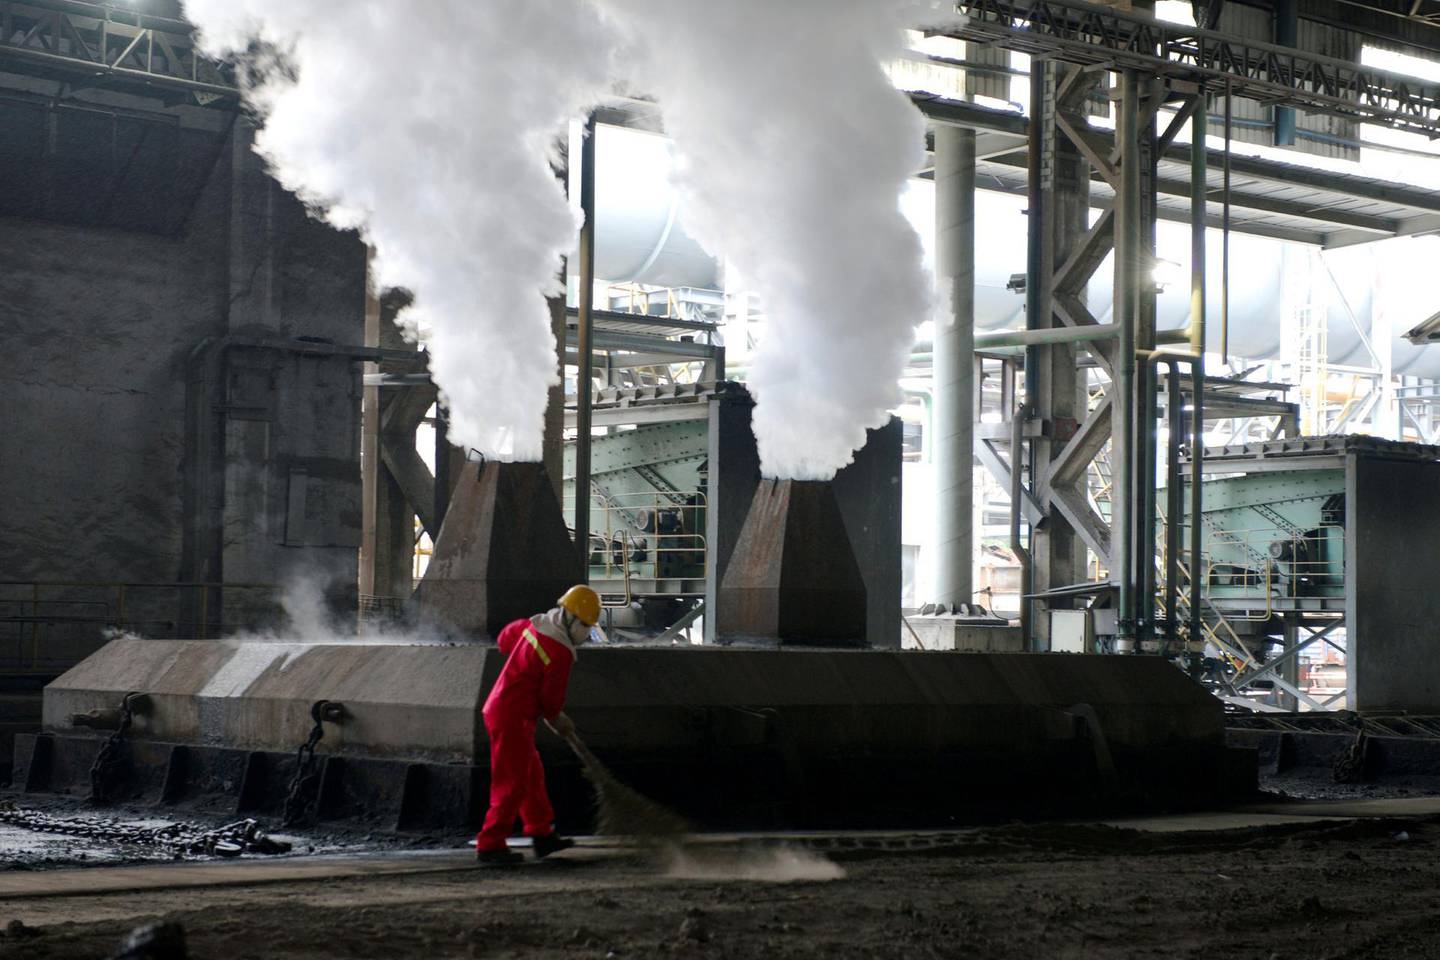 FILE PHOTO: A worker is seen at the workshop of a steel mill in Huaian, Jiangsu province, China August 4, 2018. REUTERS/Stringer/File Photo ATTENTION EDITORS - THIS IMAGE WAS PROVIDED BY A THIRD PARTY. CHINA OUT.